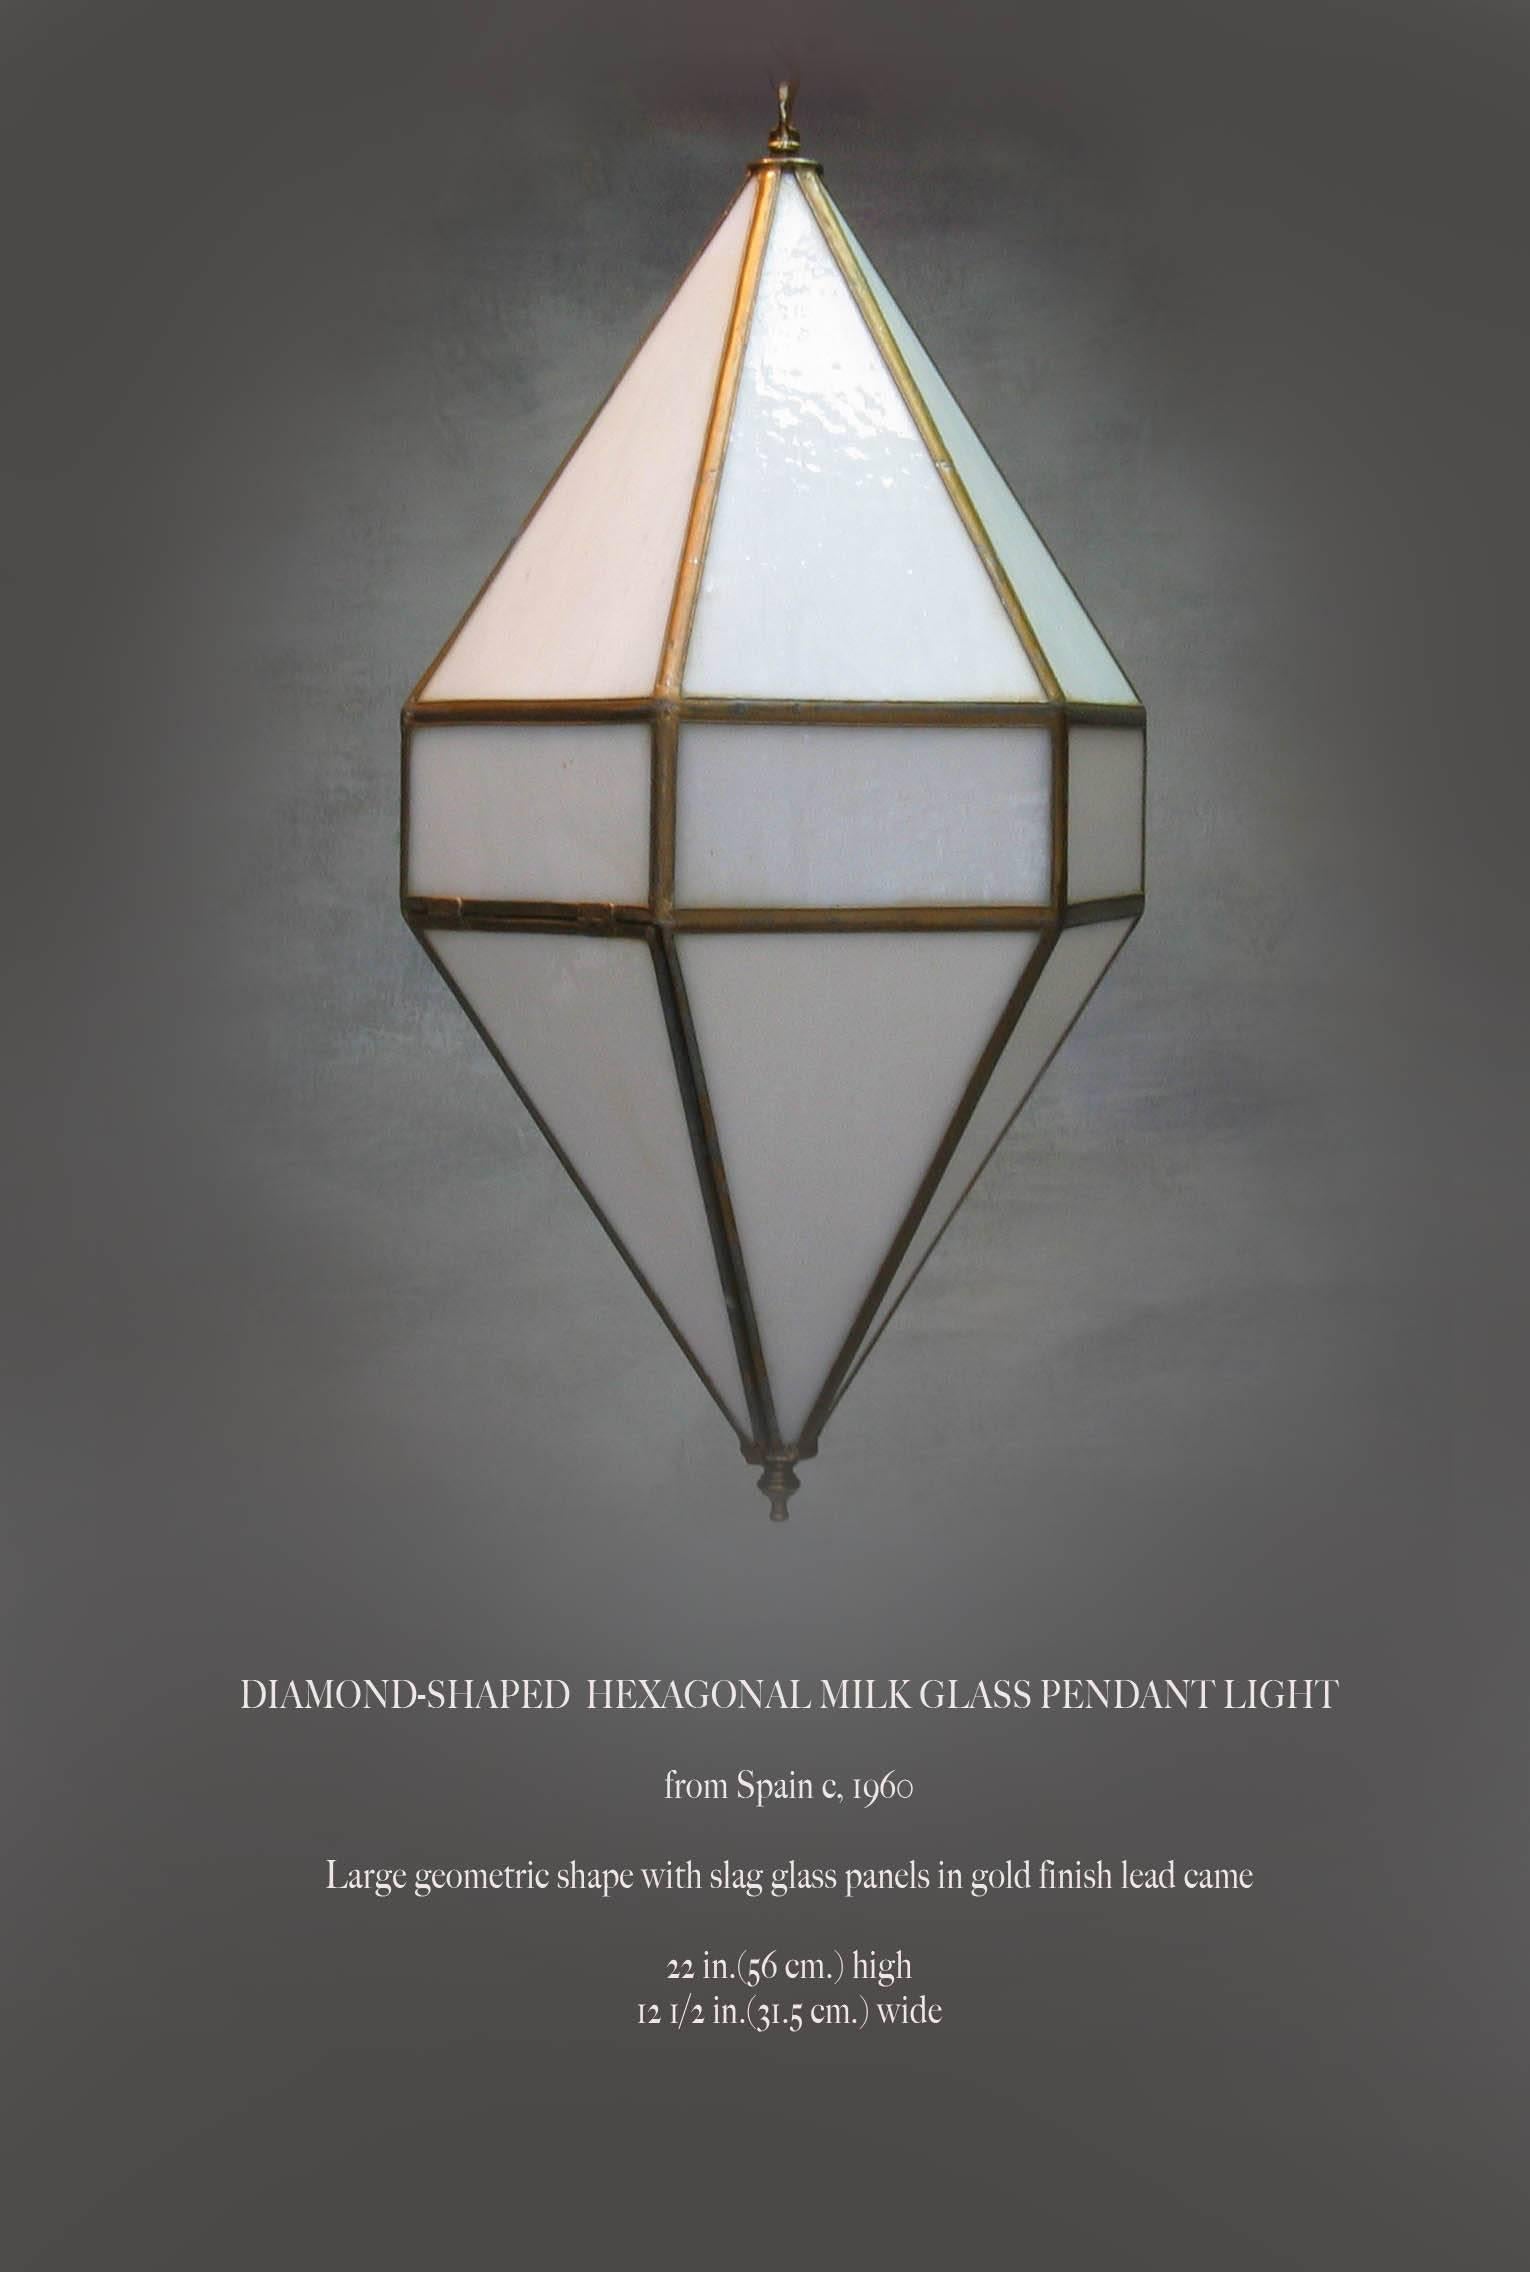 Diamond shaped hexagonal milk glass pendant light, from Spain, 1960. A large geometric shaped light with white slag glass panels with a gold finish lead came. The pendant measures 22